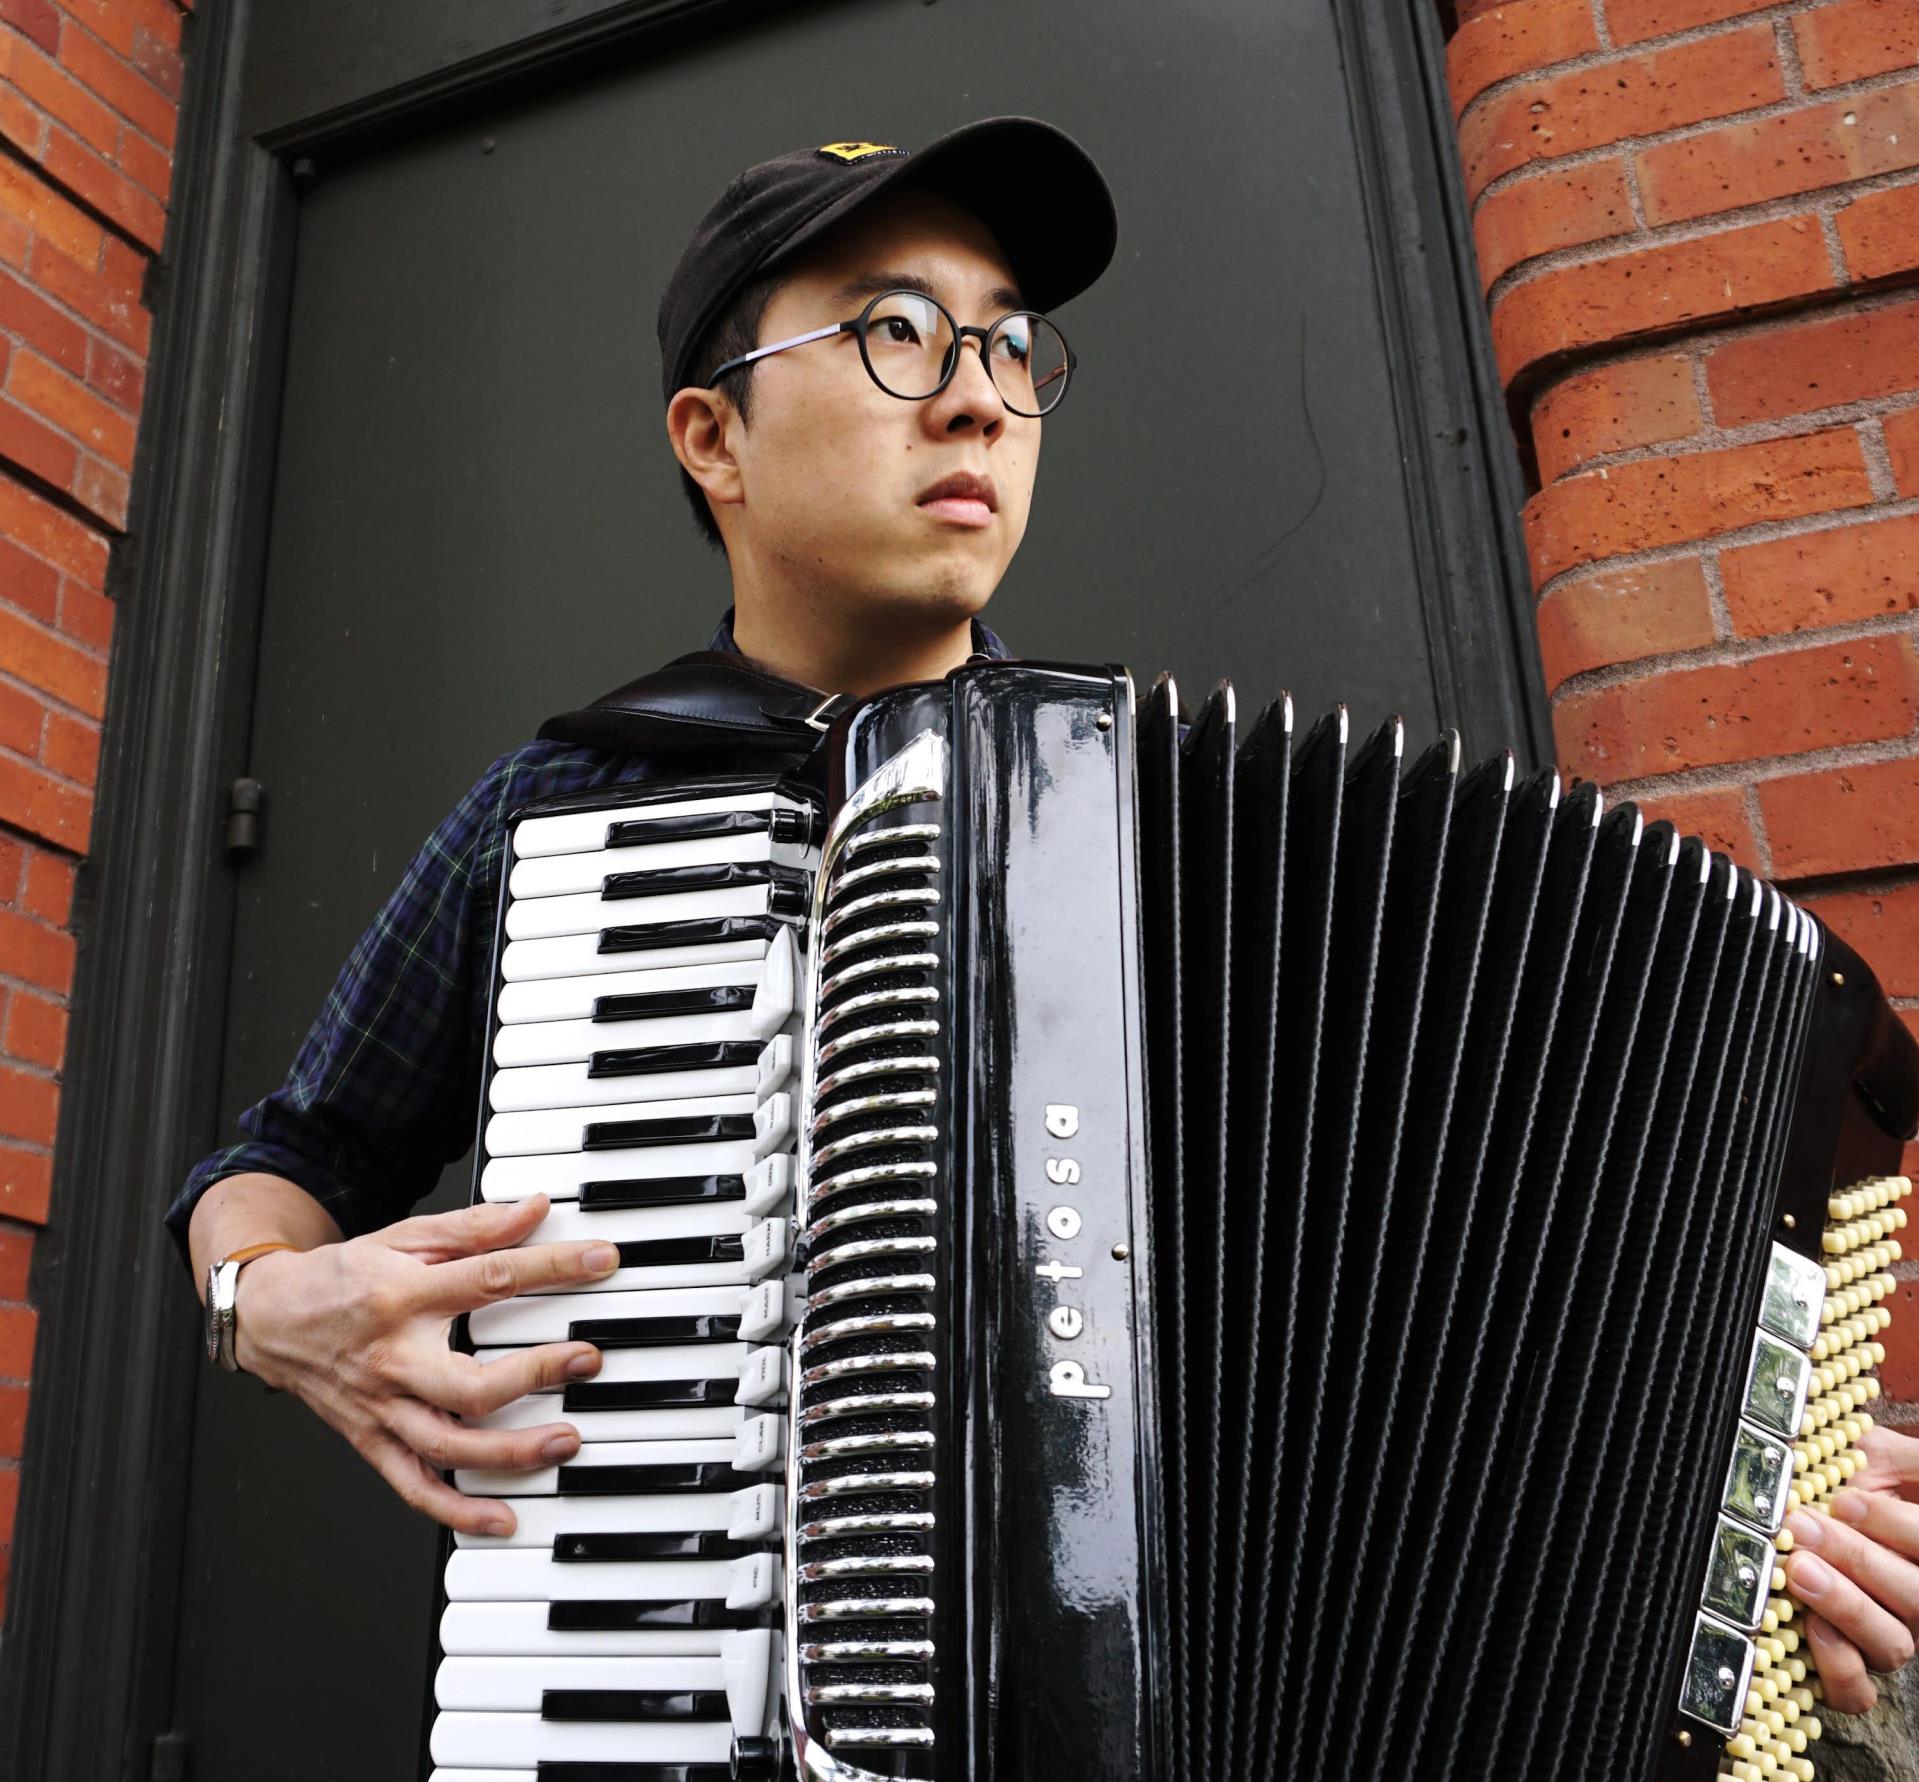 Faculty member Joshua Hou holding an accordion standing in front of a brick wall